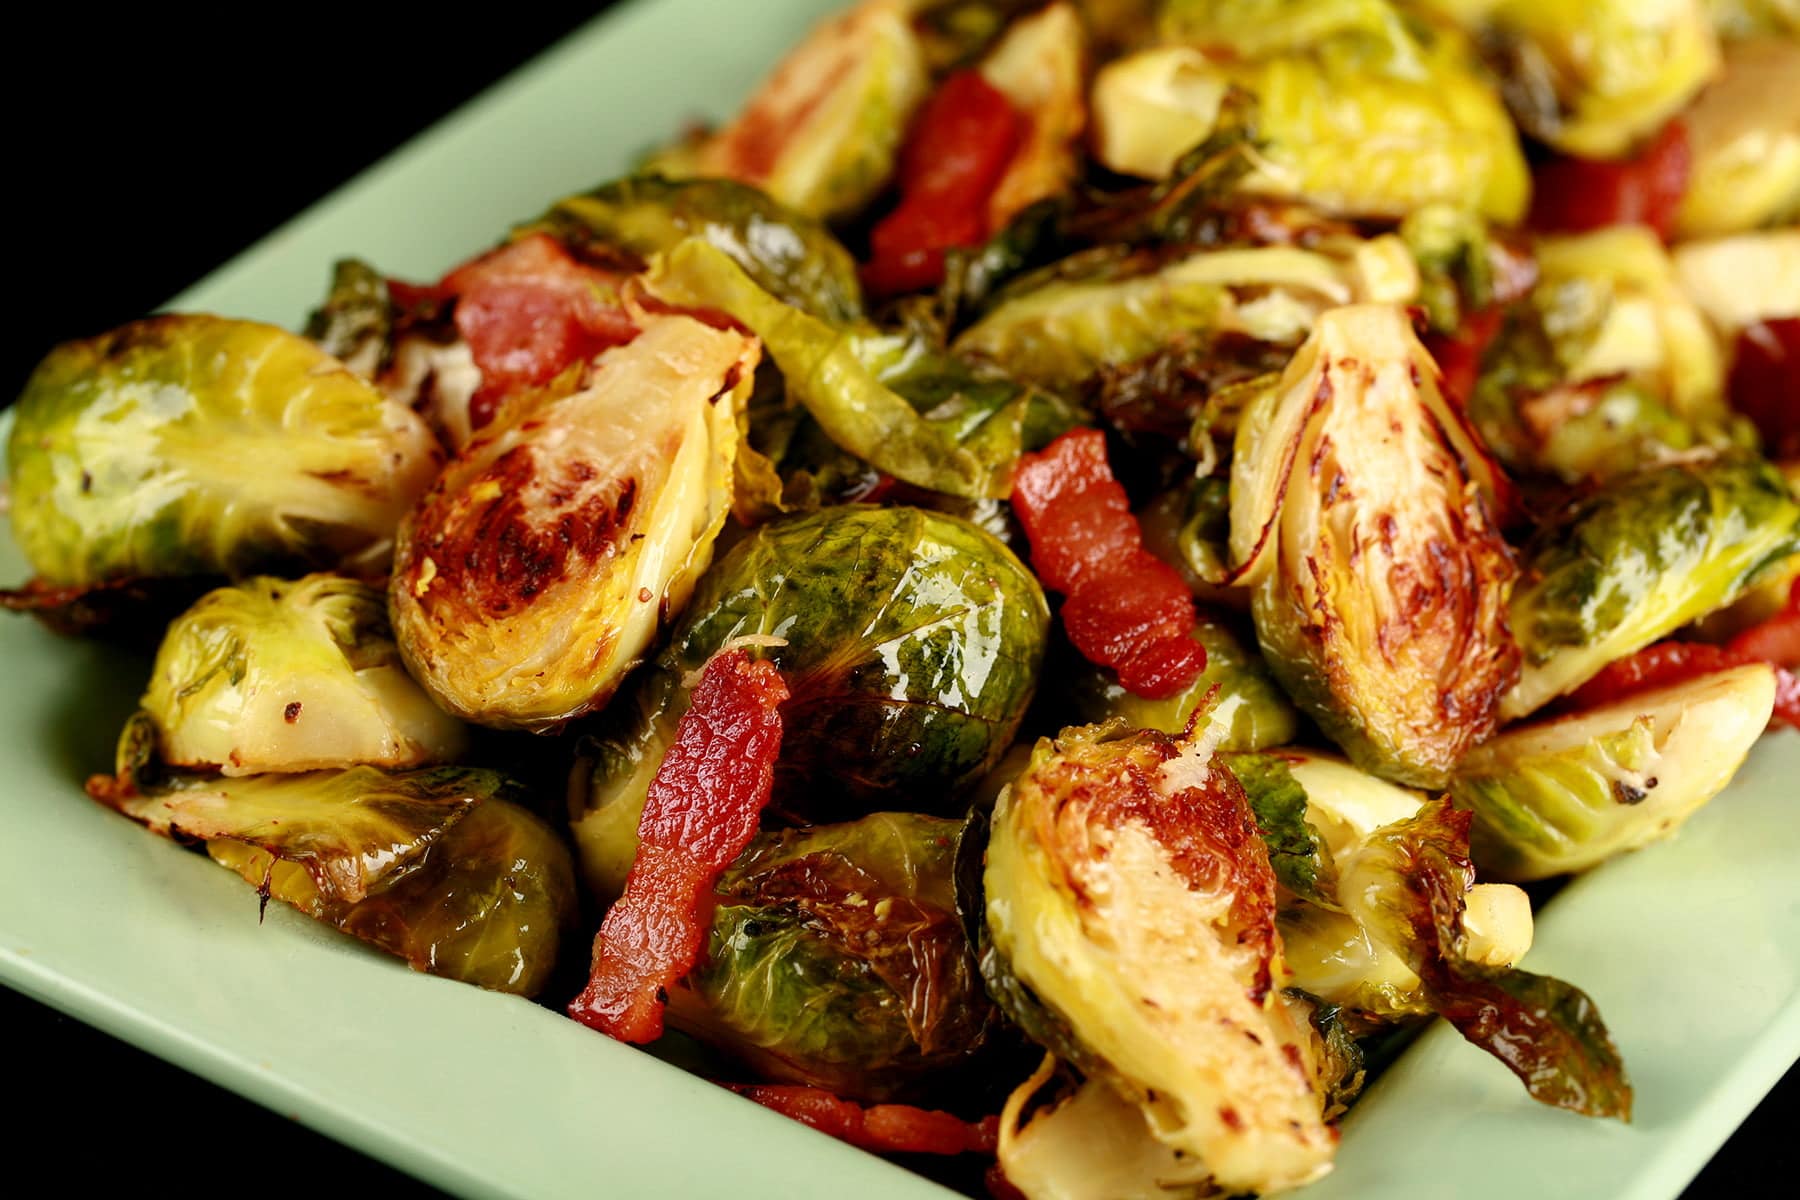 A pale green platter, mounded with roasted Brussels Sprouts. Chopped Bacon is visible throughout.